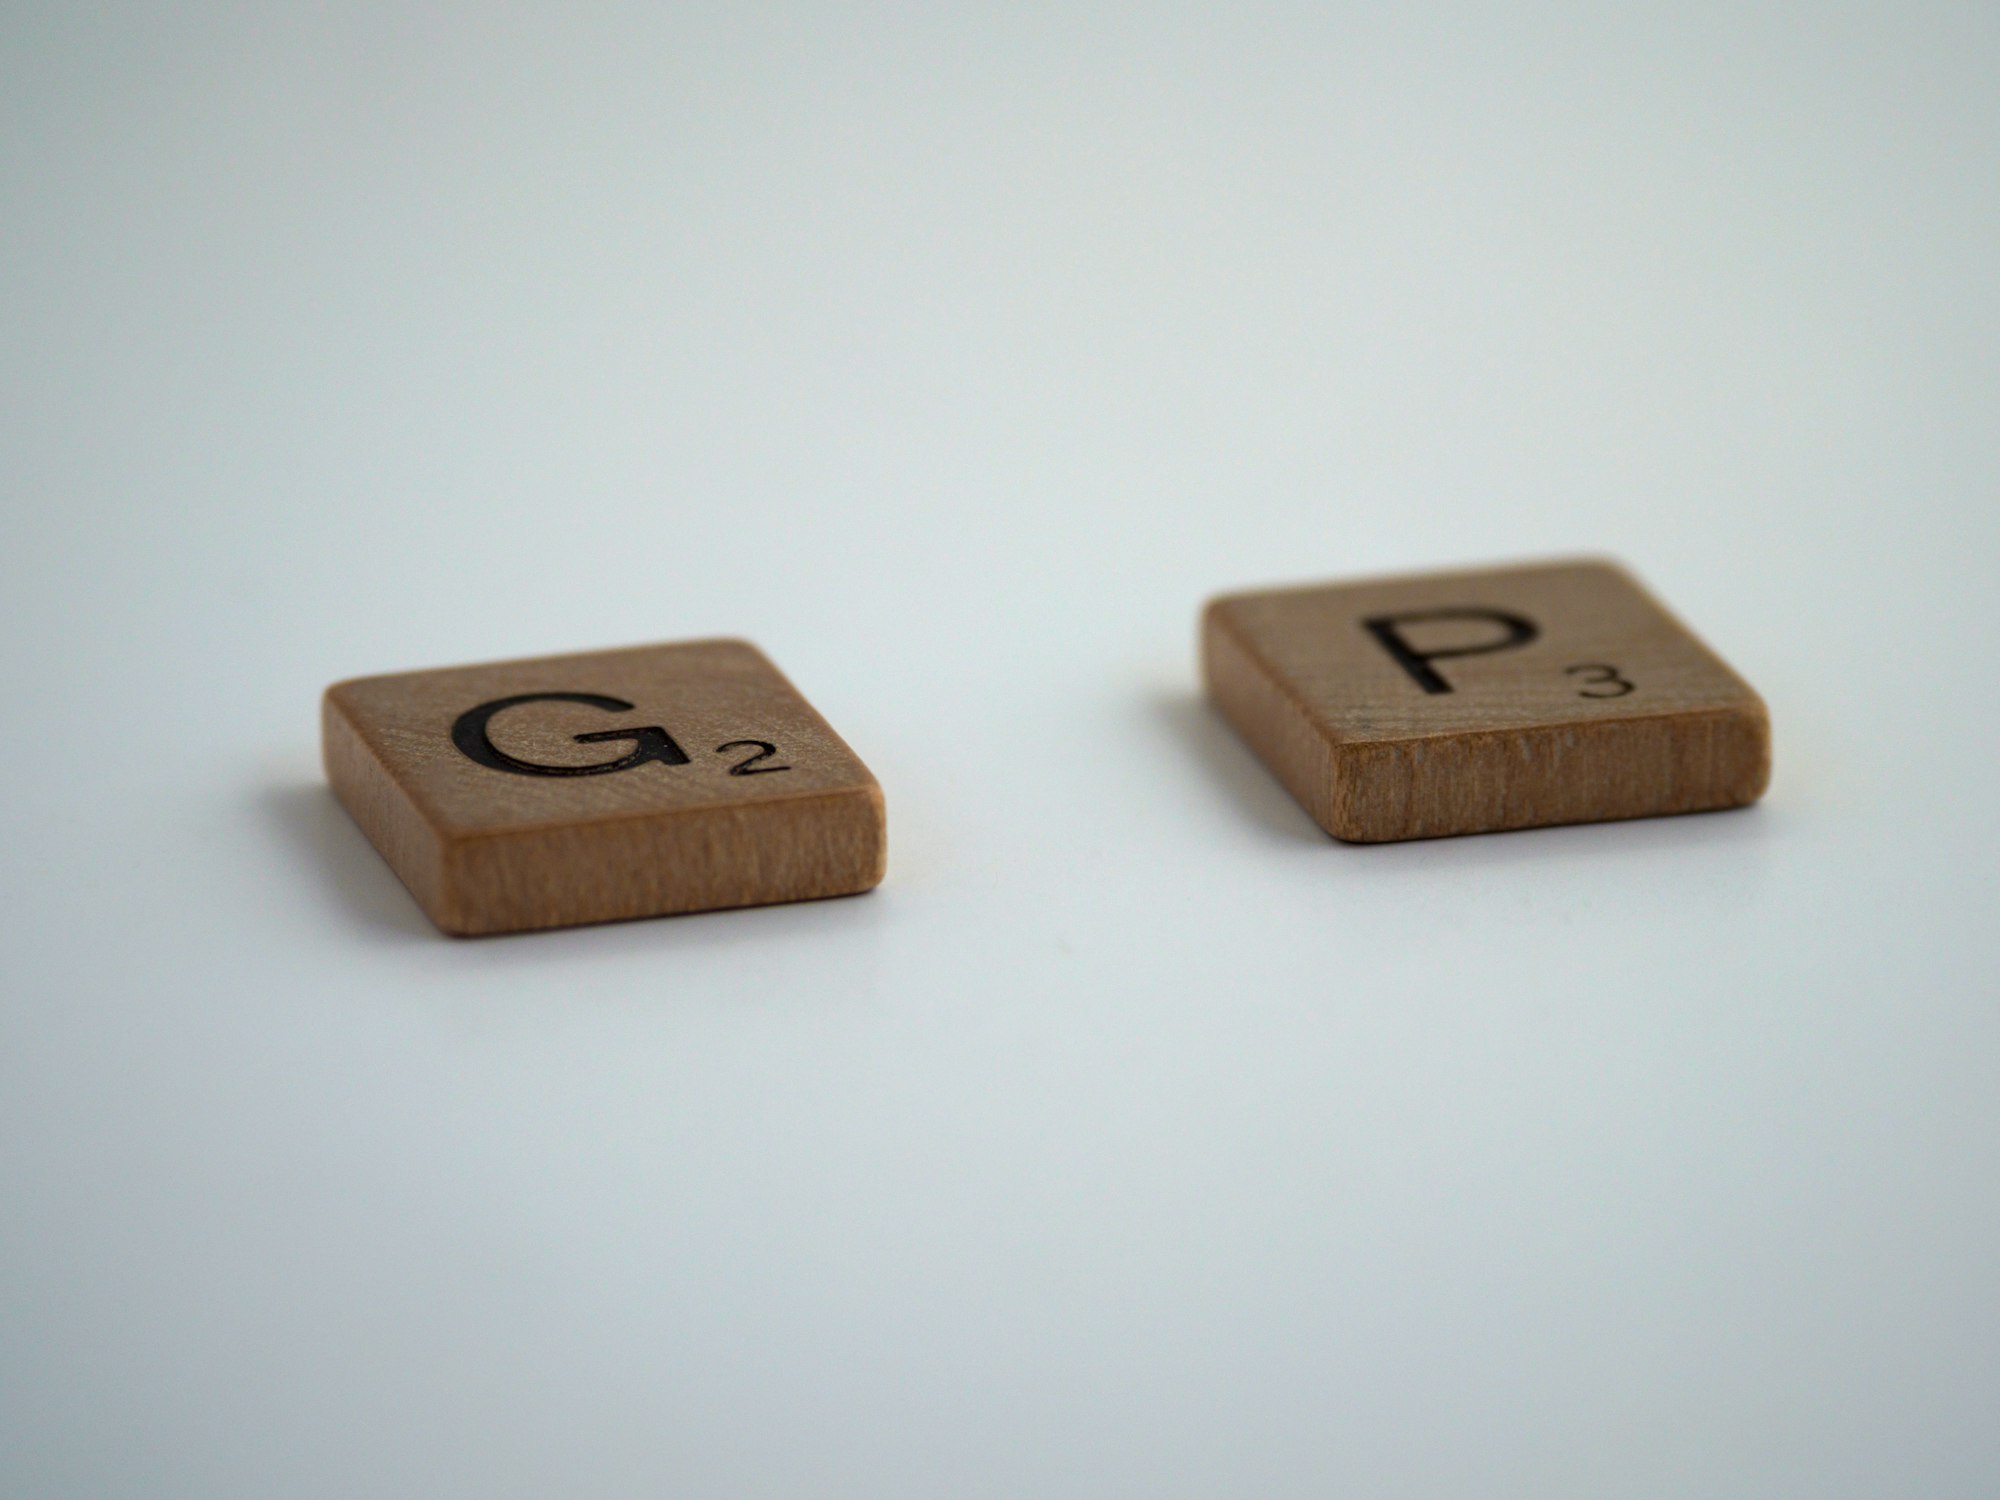 scrabble, scrabble pieces, lettering, letters, wood, scrabble tiles, white background, words, type, typography, design, layout, incomplete, imperfect, not finished, finish, lacking, omit, gap, hole, lacuna, mind the gap, 
